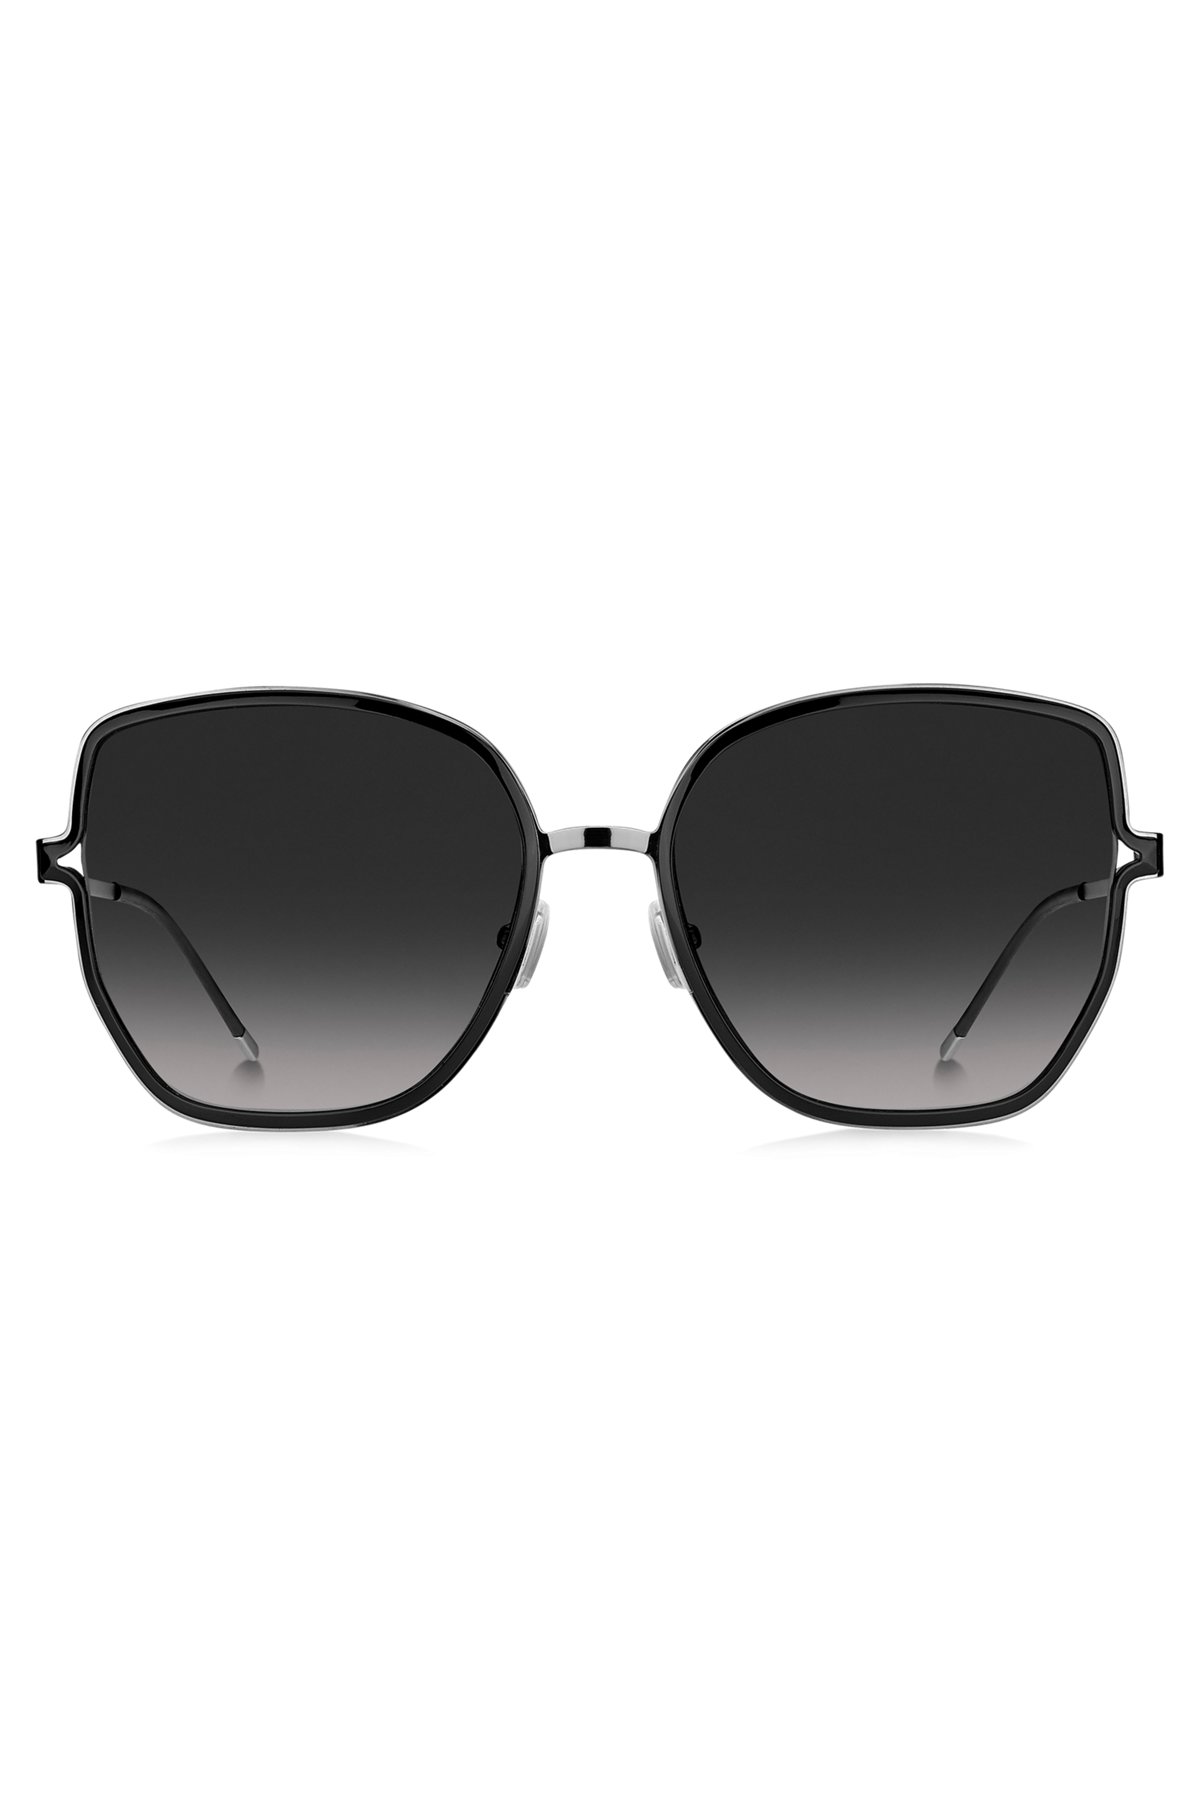 Black-frame sunglasses with forked temples and branded chain, Black